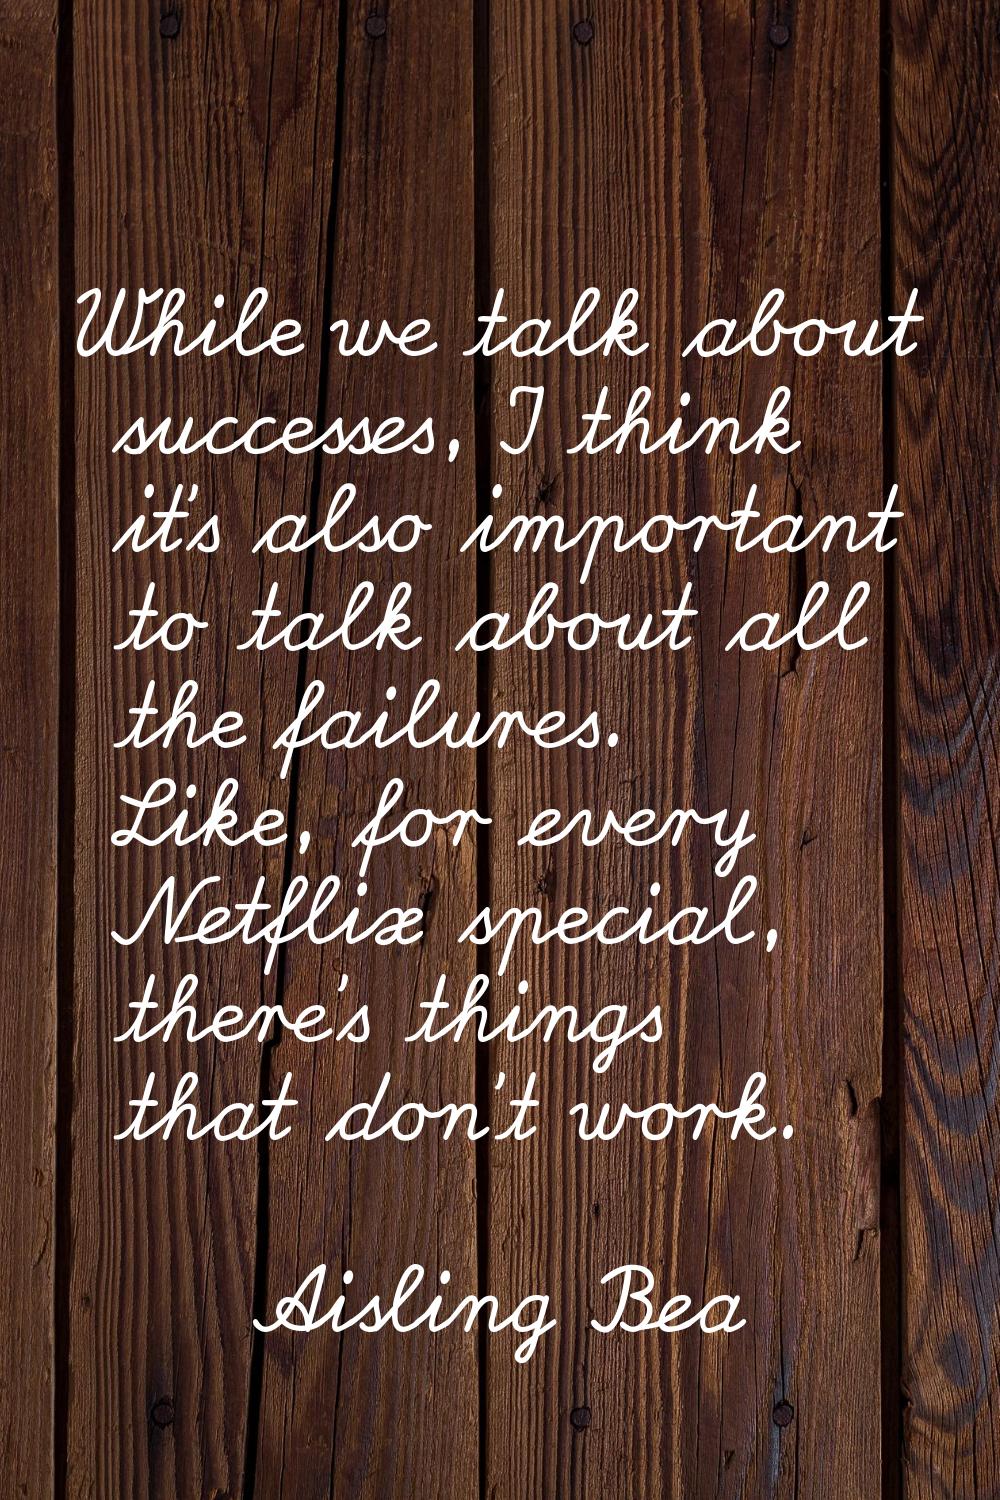 While we talk about successes, I think it's also important to talk about all the failures. Like, fo